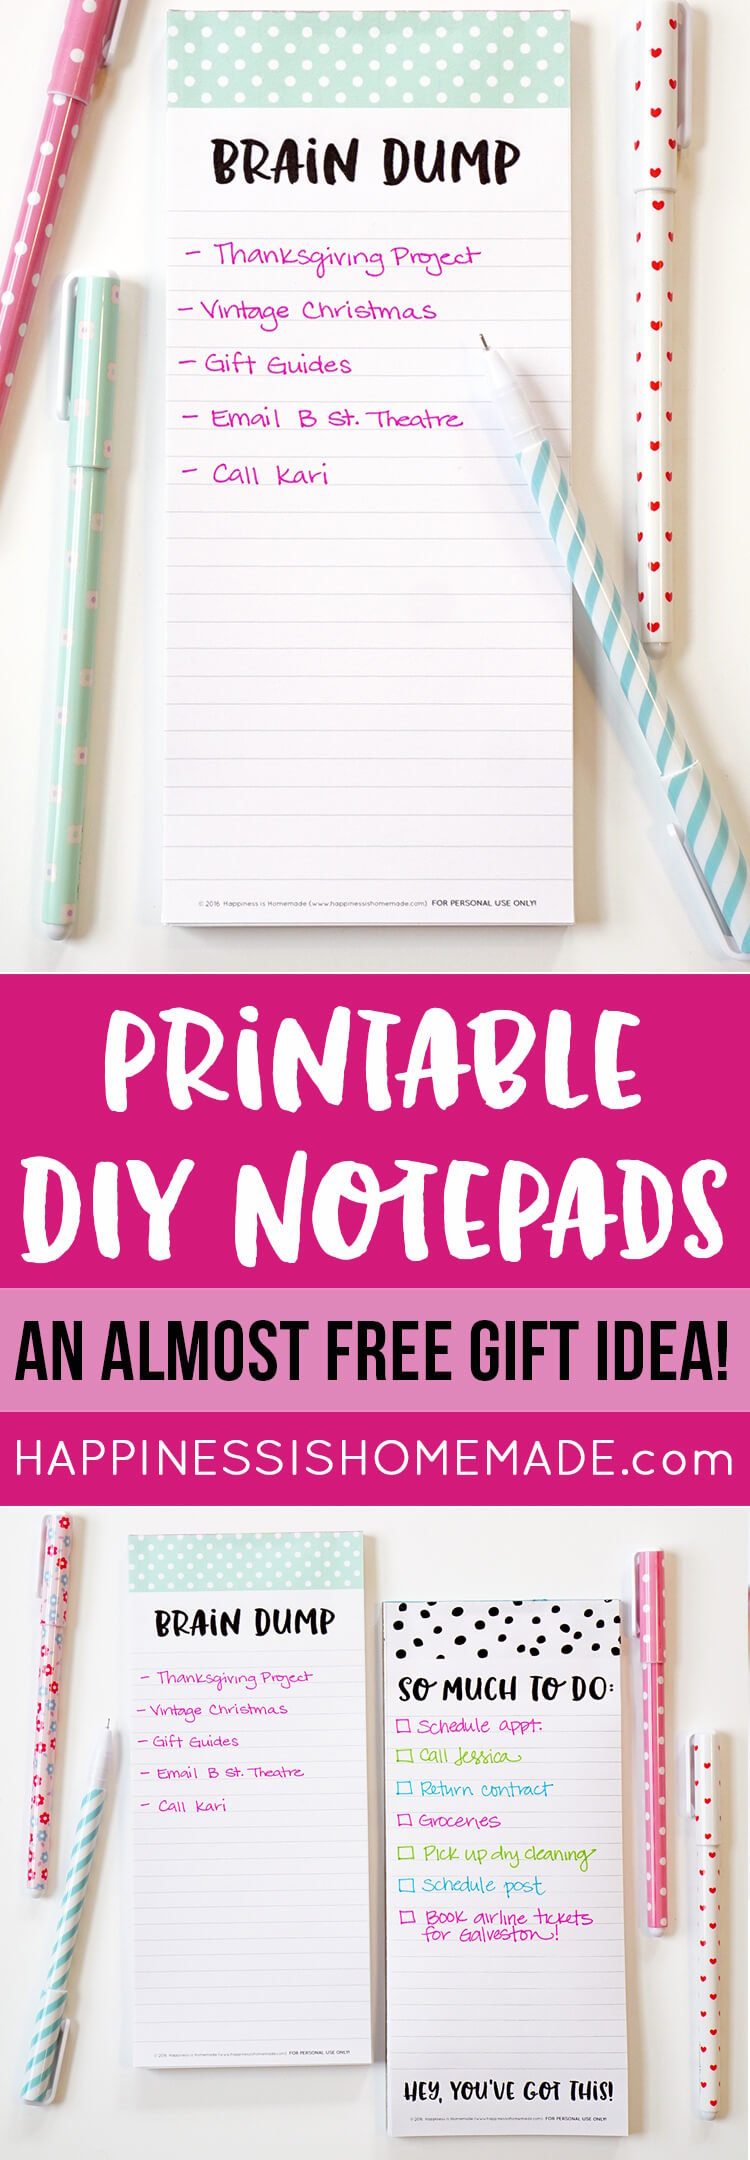 printable-diy-notebooks-an-almost-free-gift-idea